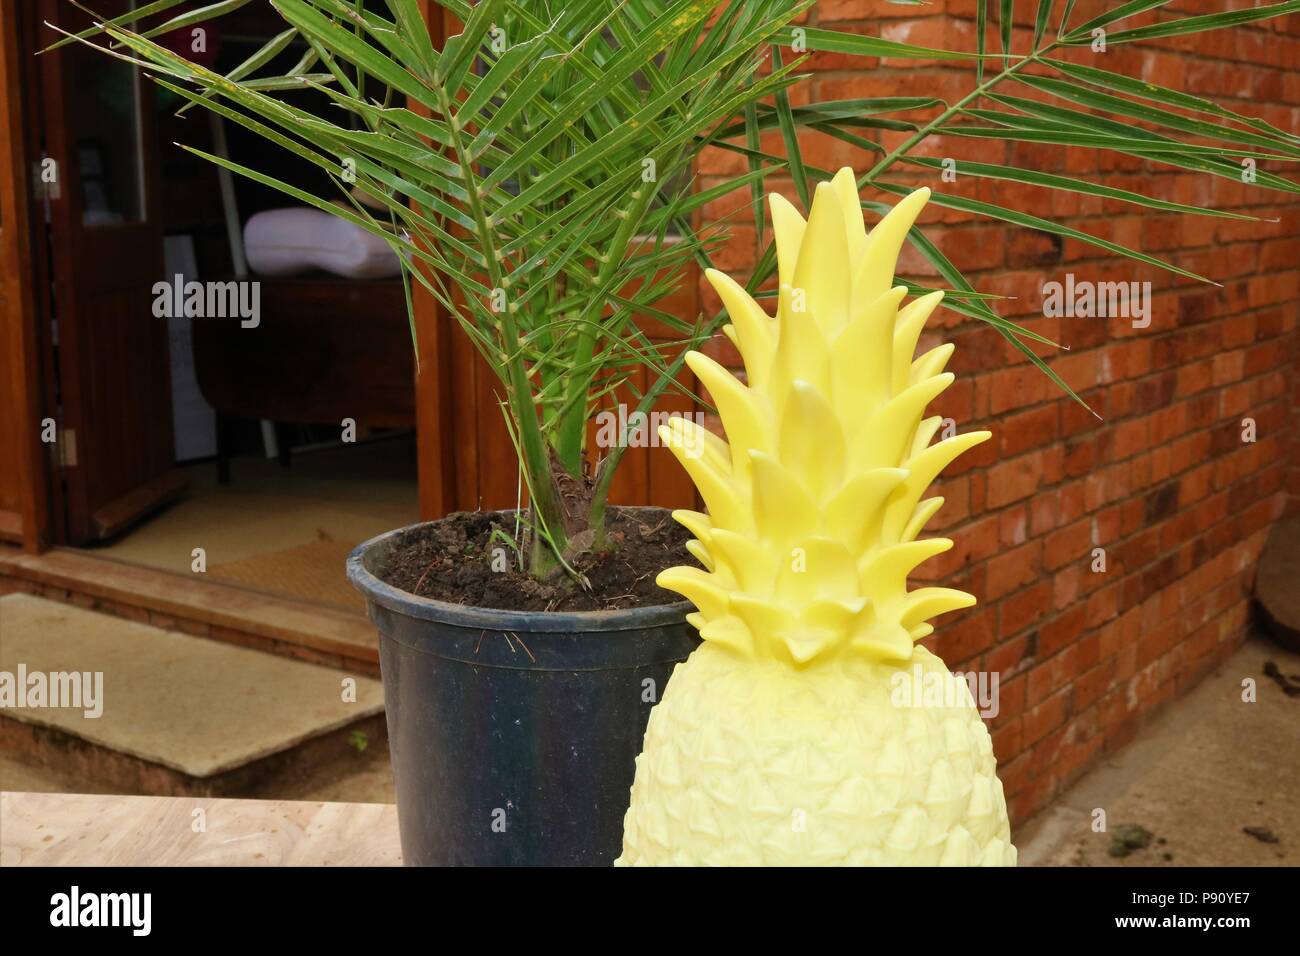 Green plant and yellow plastic pineapple at a fete - alternative display decoration. Stock Photo